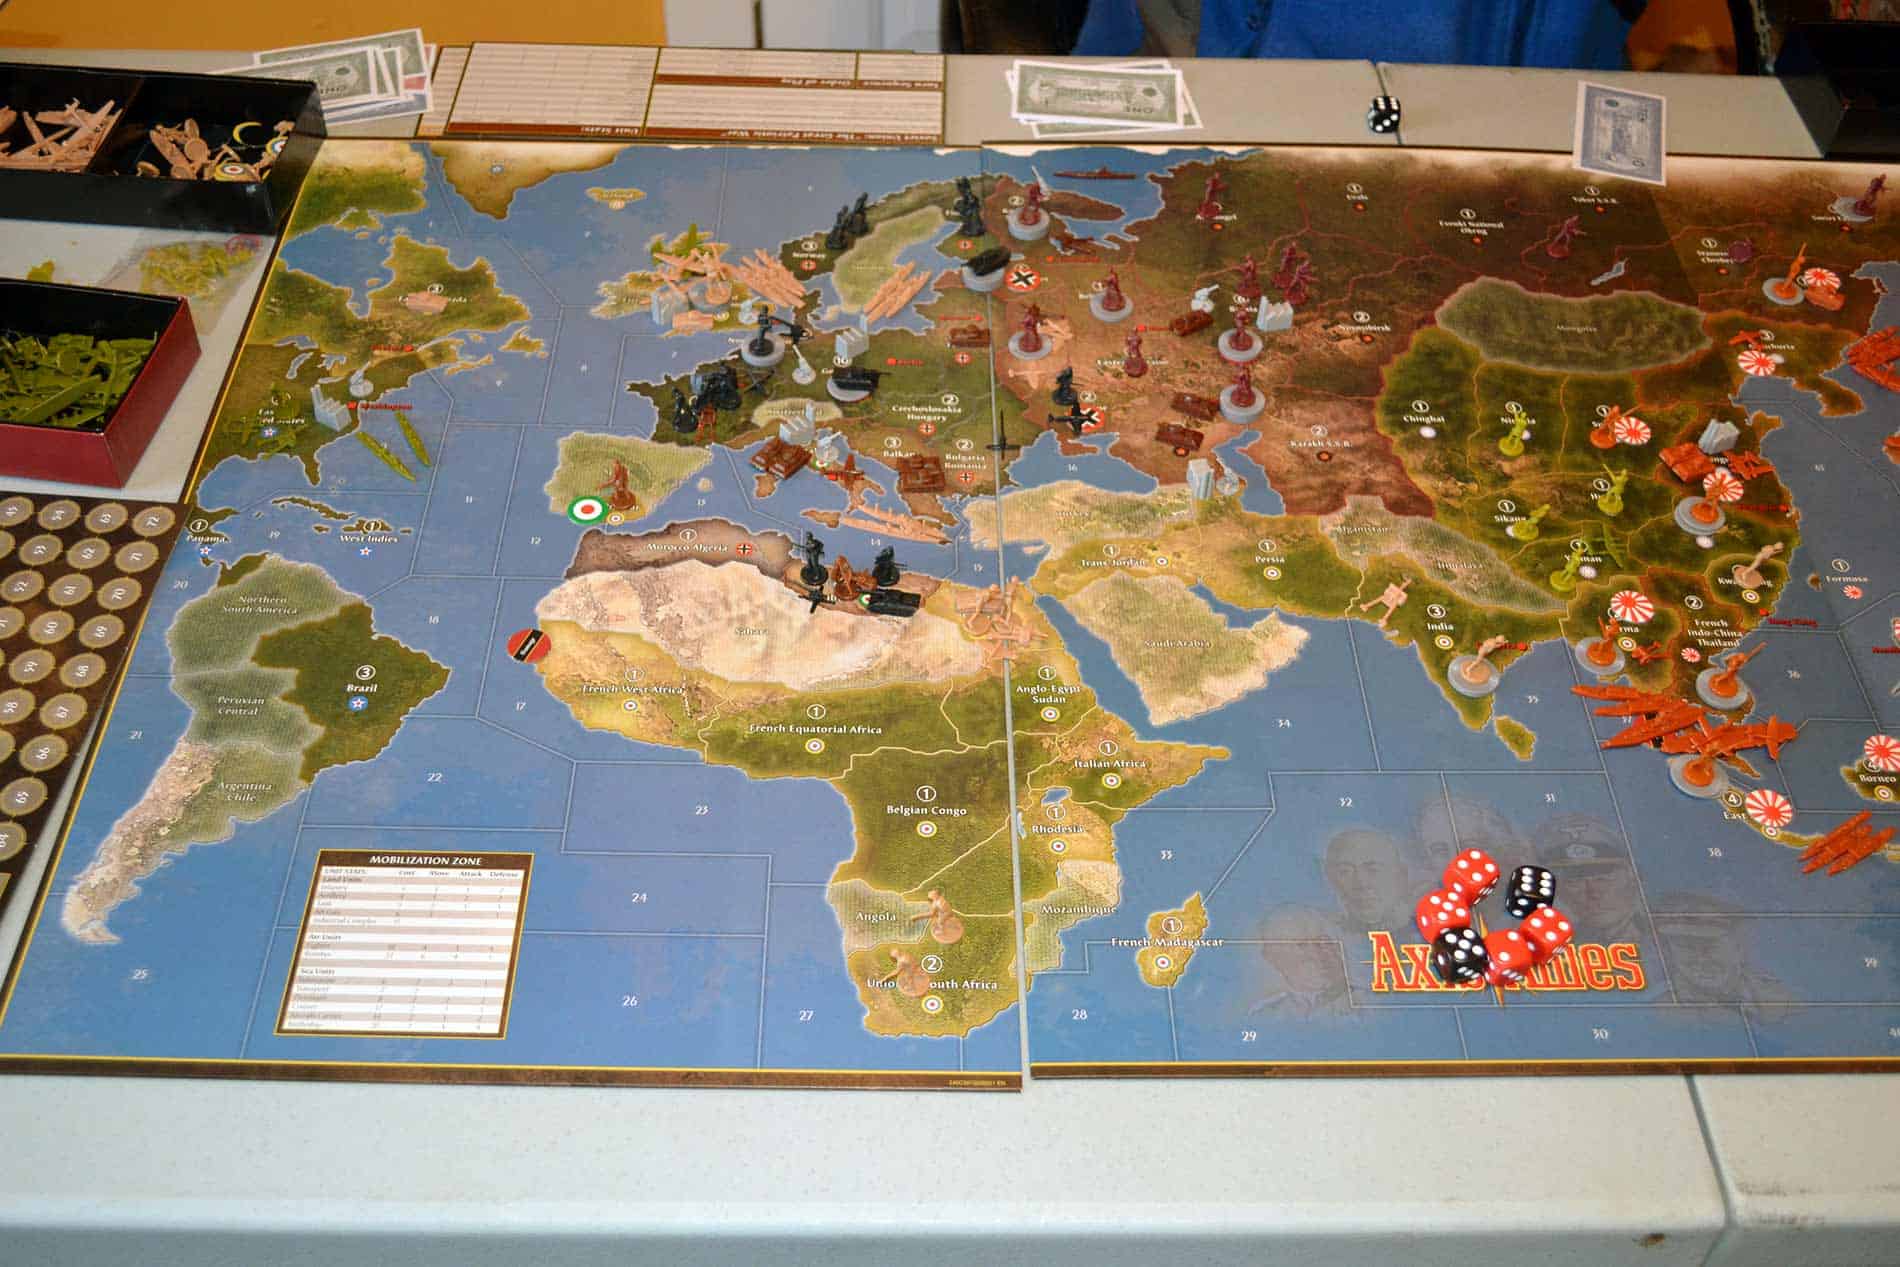 axis and allies d day strategy